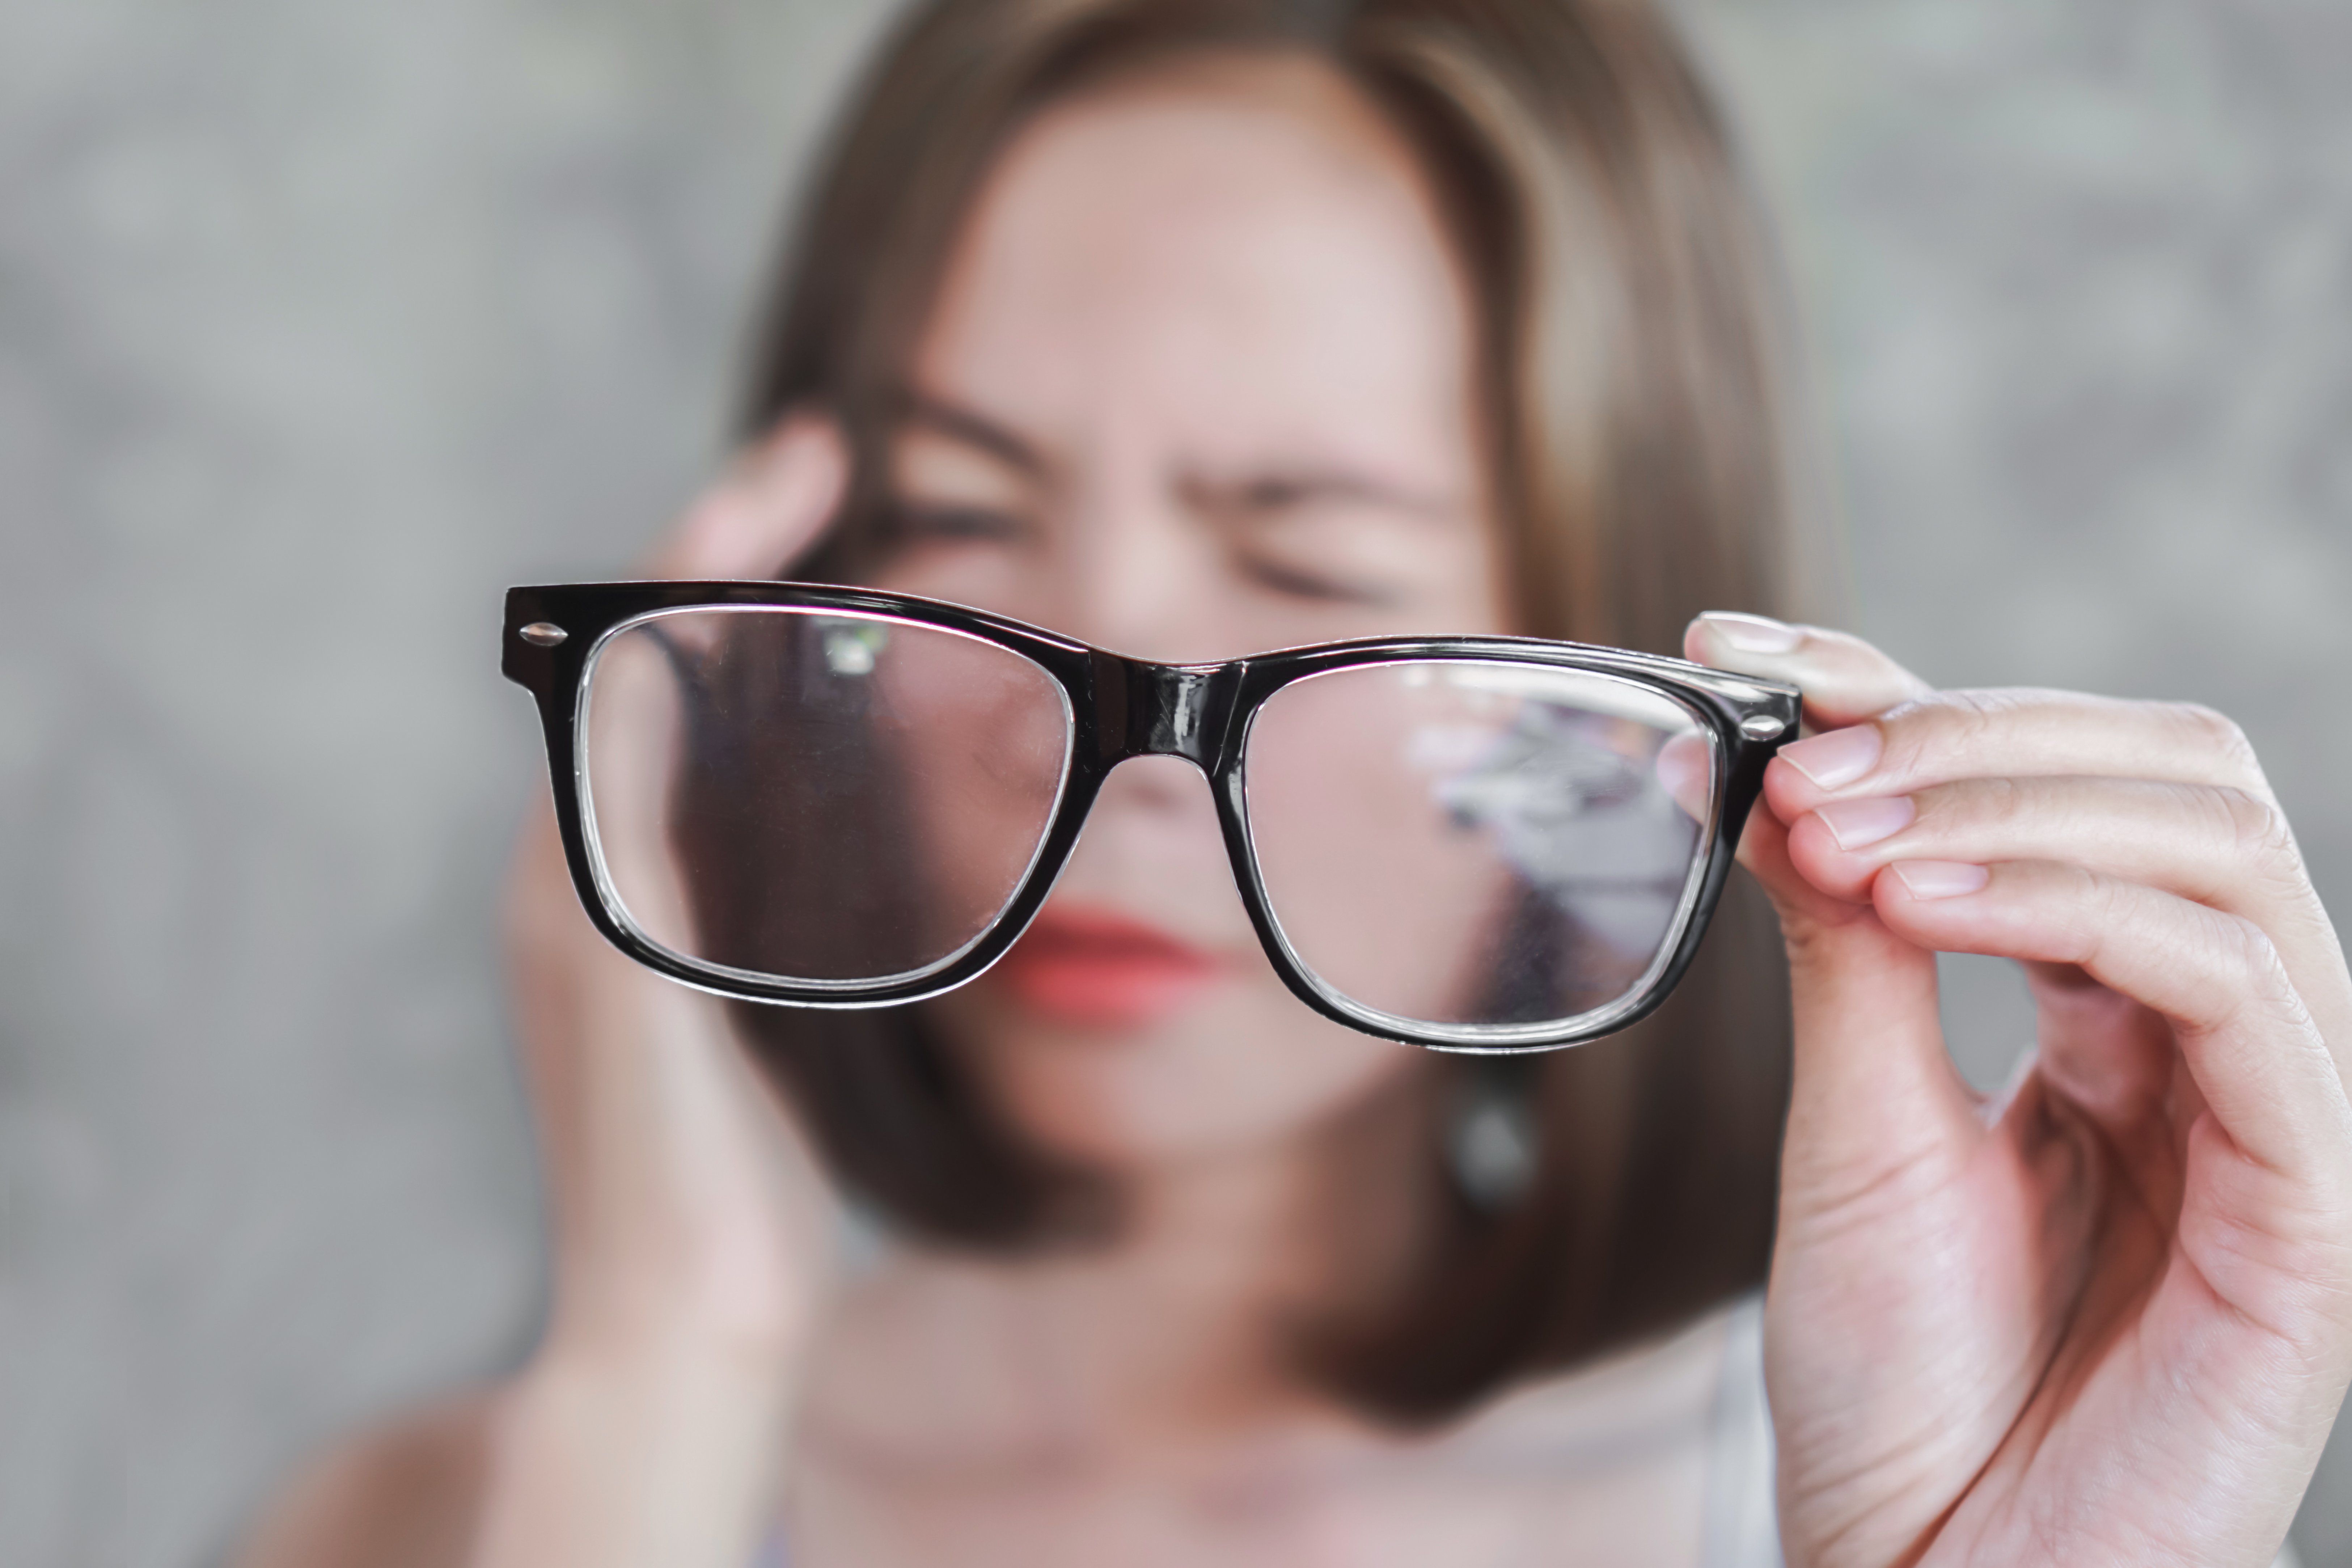 Can Myopia Be Cured or Only Managed?